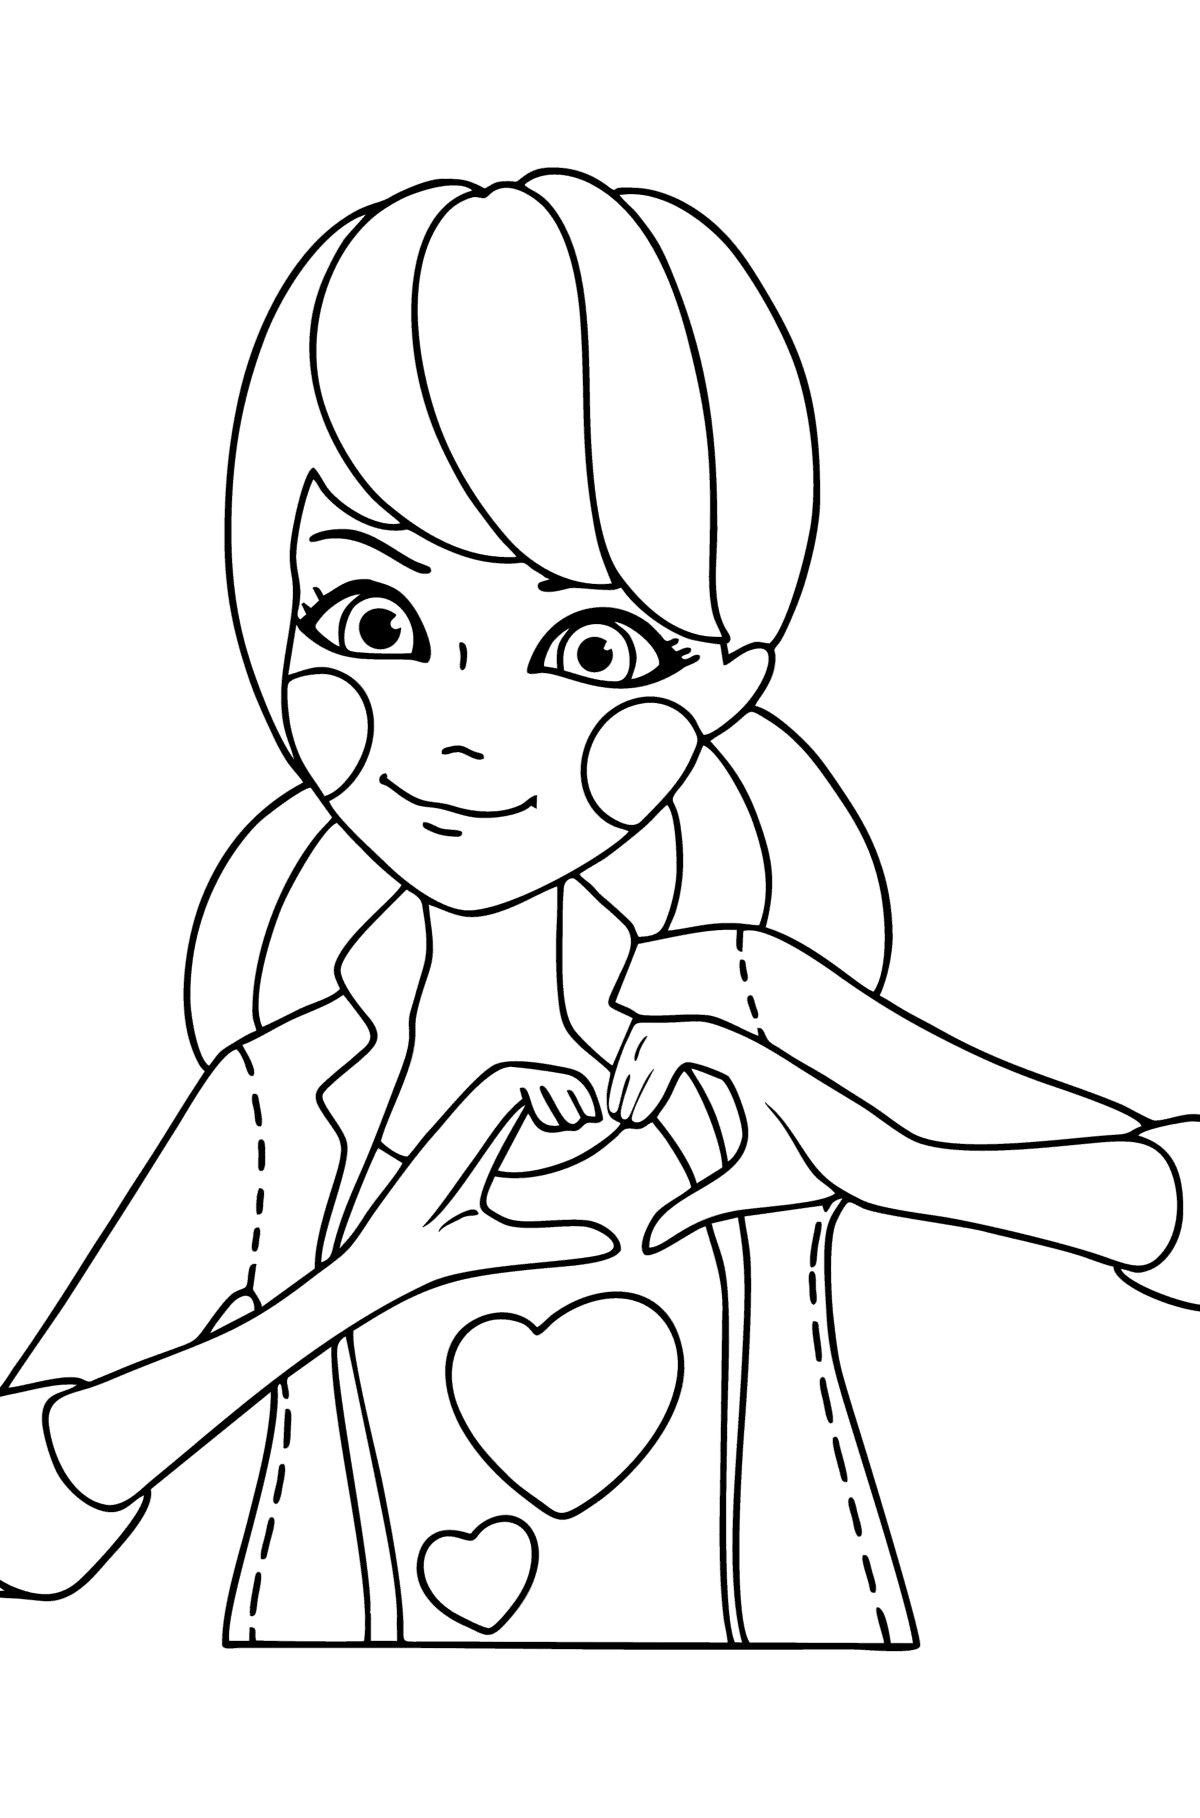 Marinette coloring page - Coloring Pages for Kids